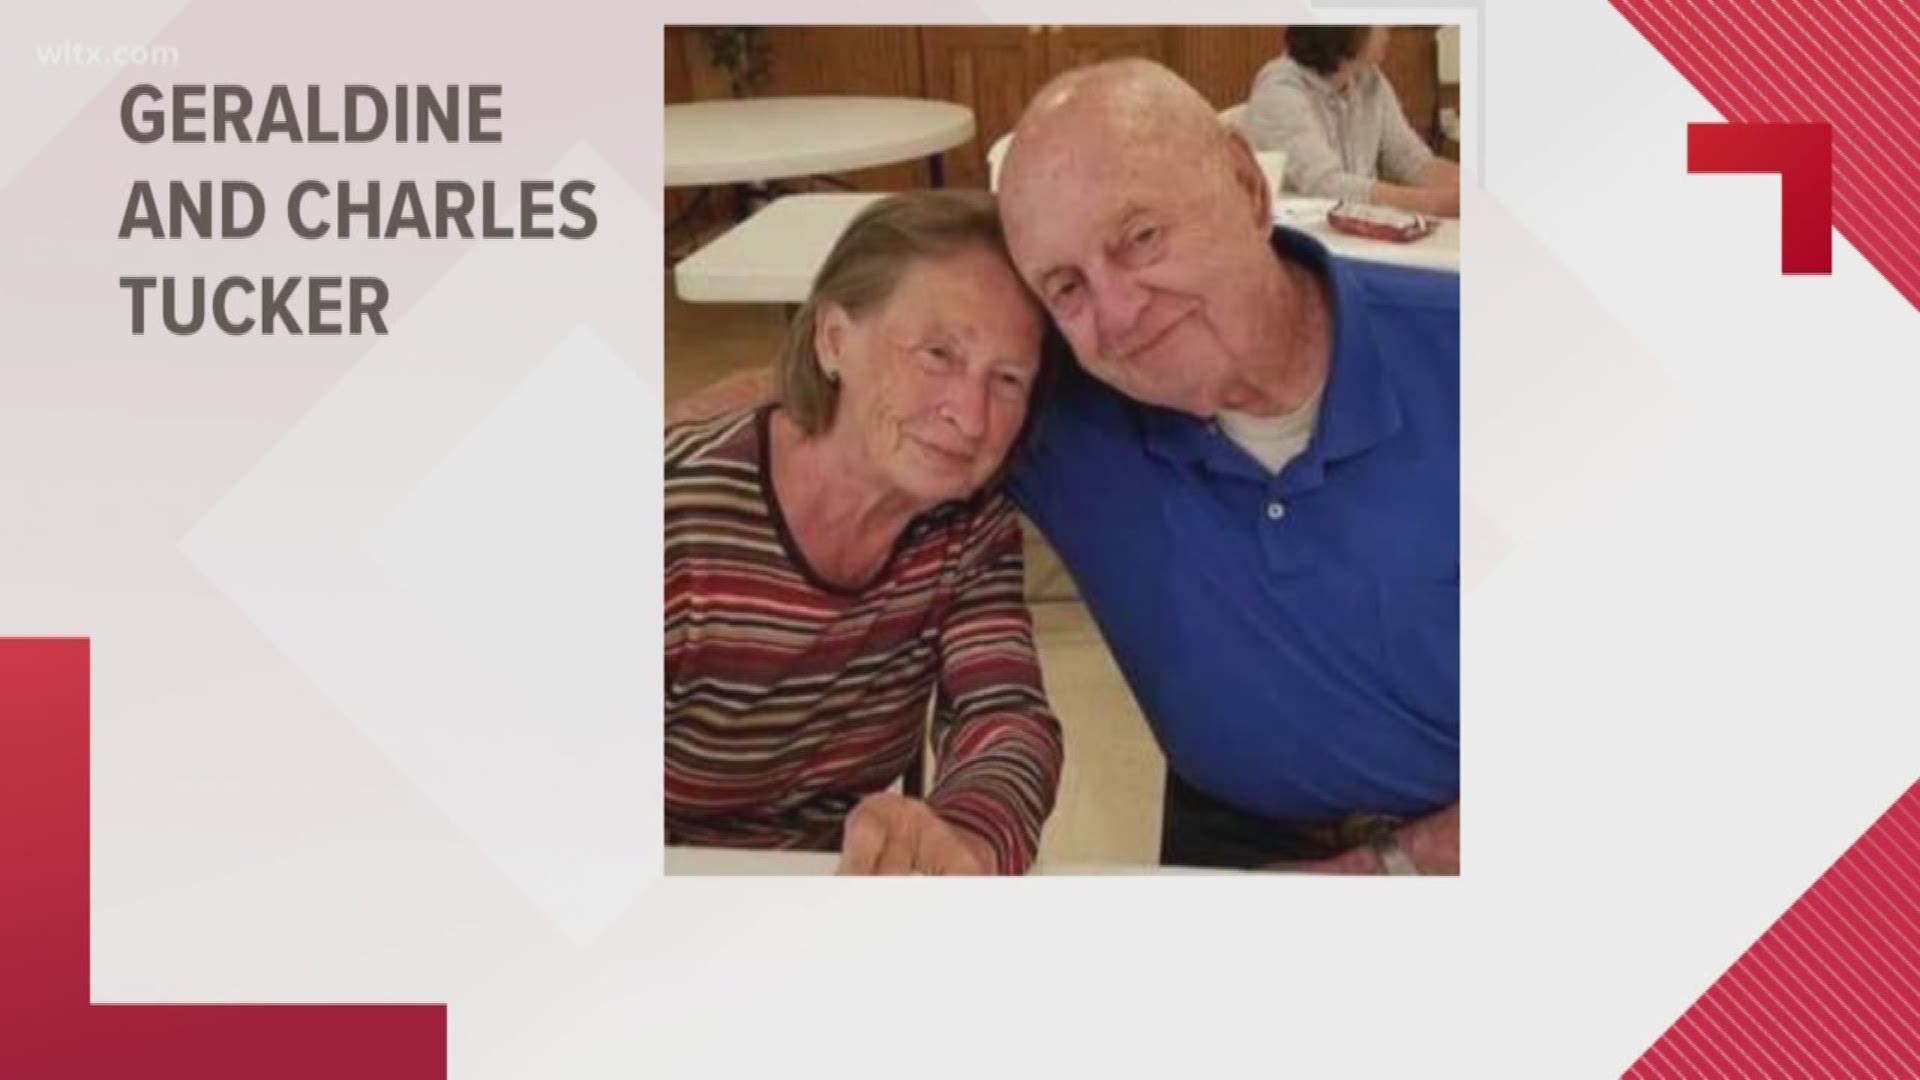 Deputies are asking for the public's help finding a missing couple whose last known location was in Richland County.  80-year-old Geraldine Tucker and 84-year-old Charles Tucker left their home in Chester County for an appointment in Richland County on ye